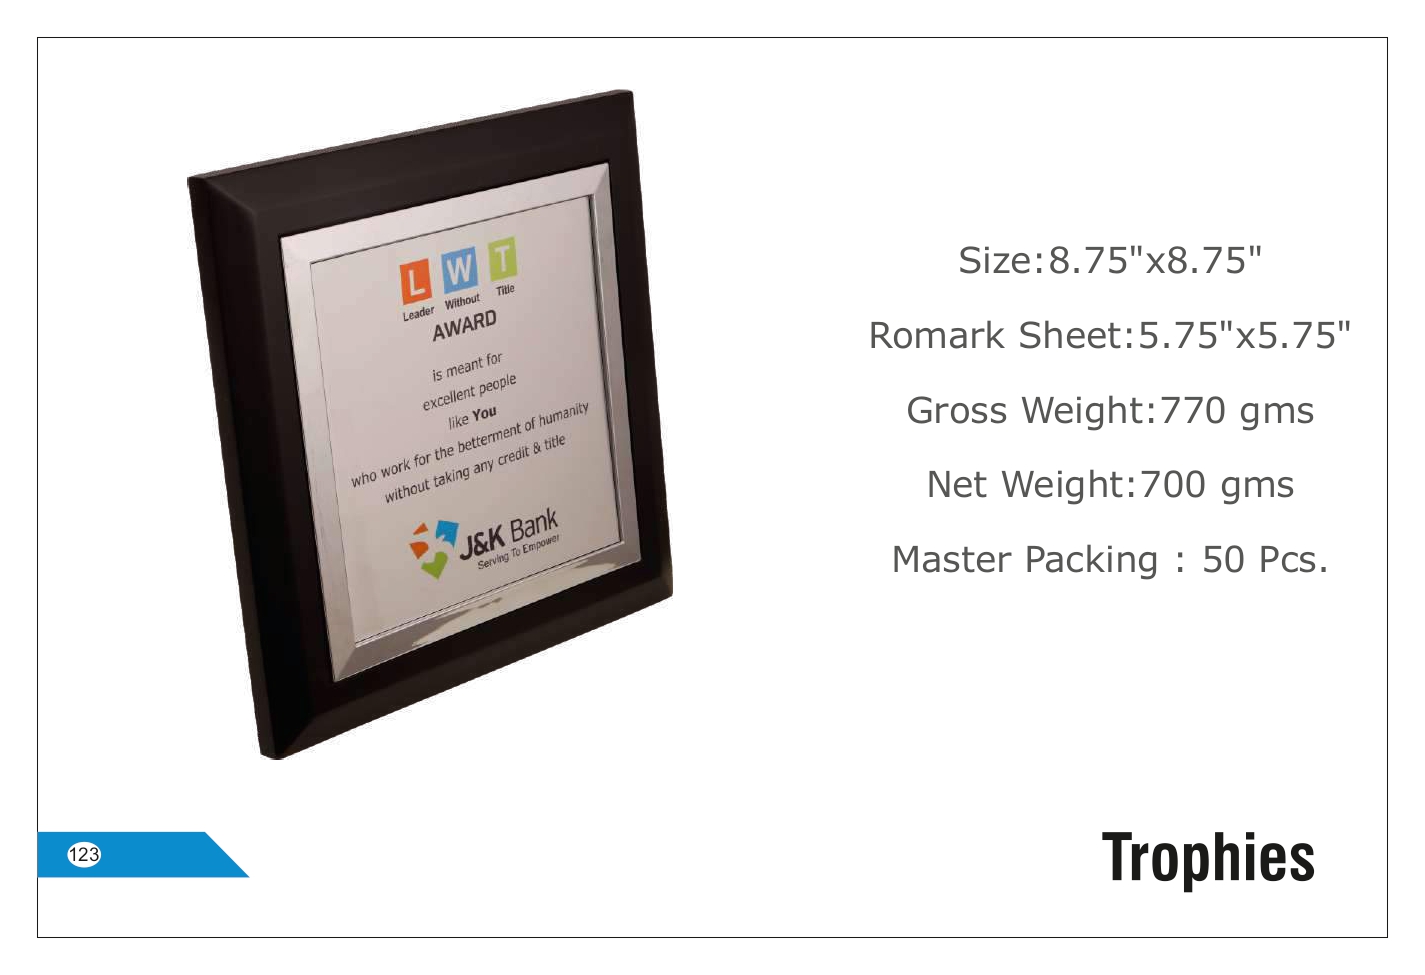 Square Recognition Trophy with Romark Sheet